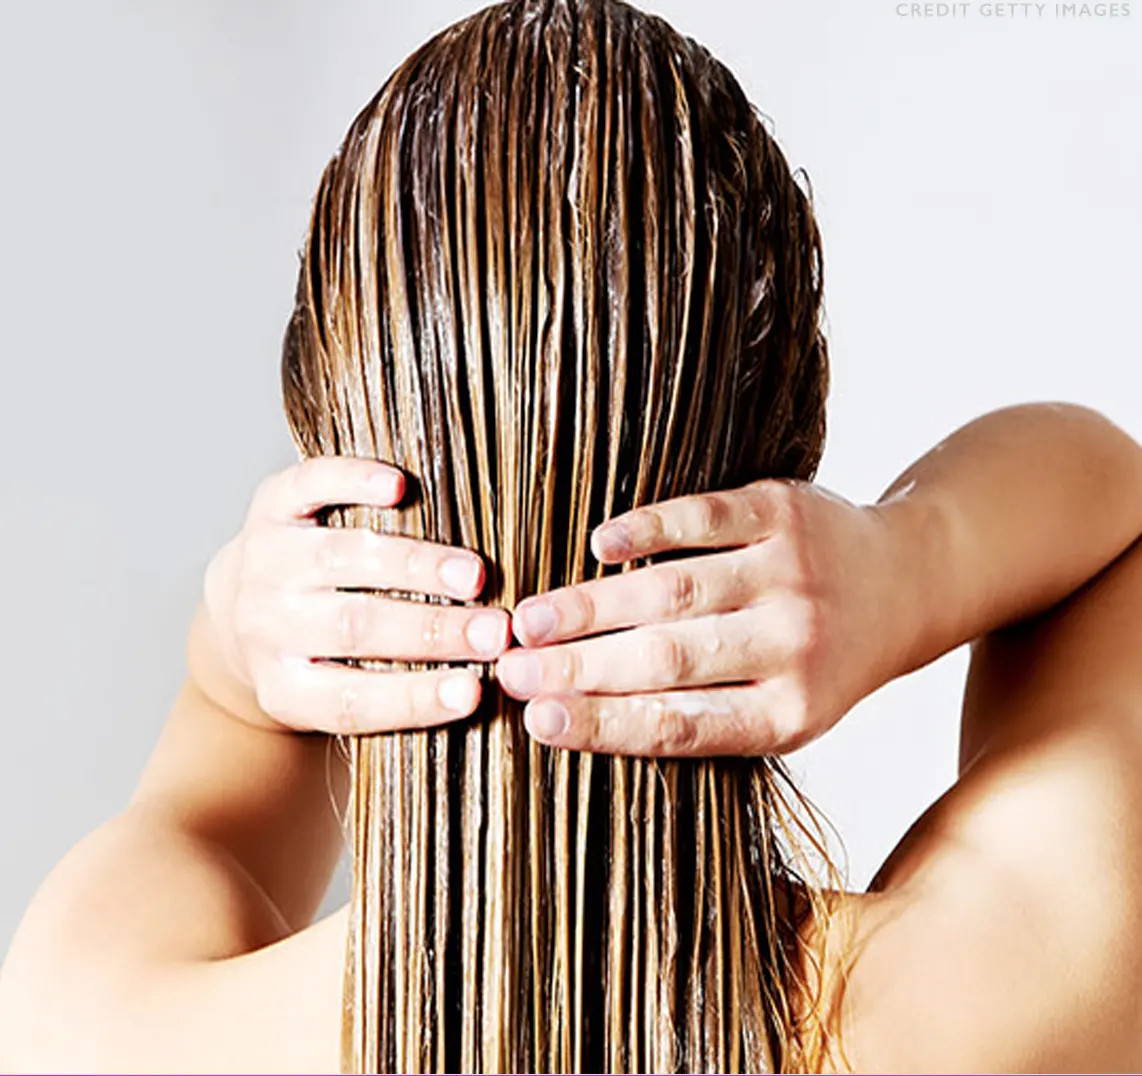 Does Hair Oil Make Your Hair Greasy?